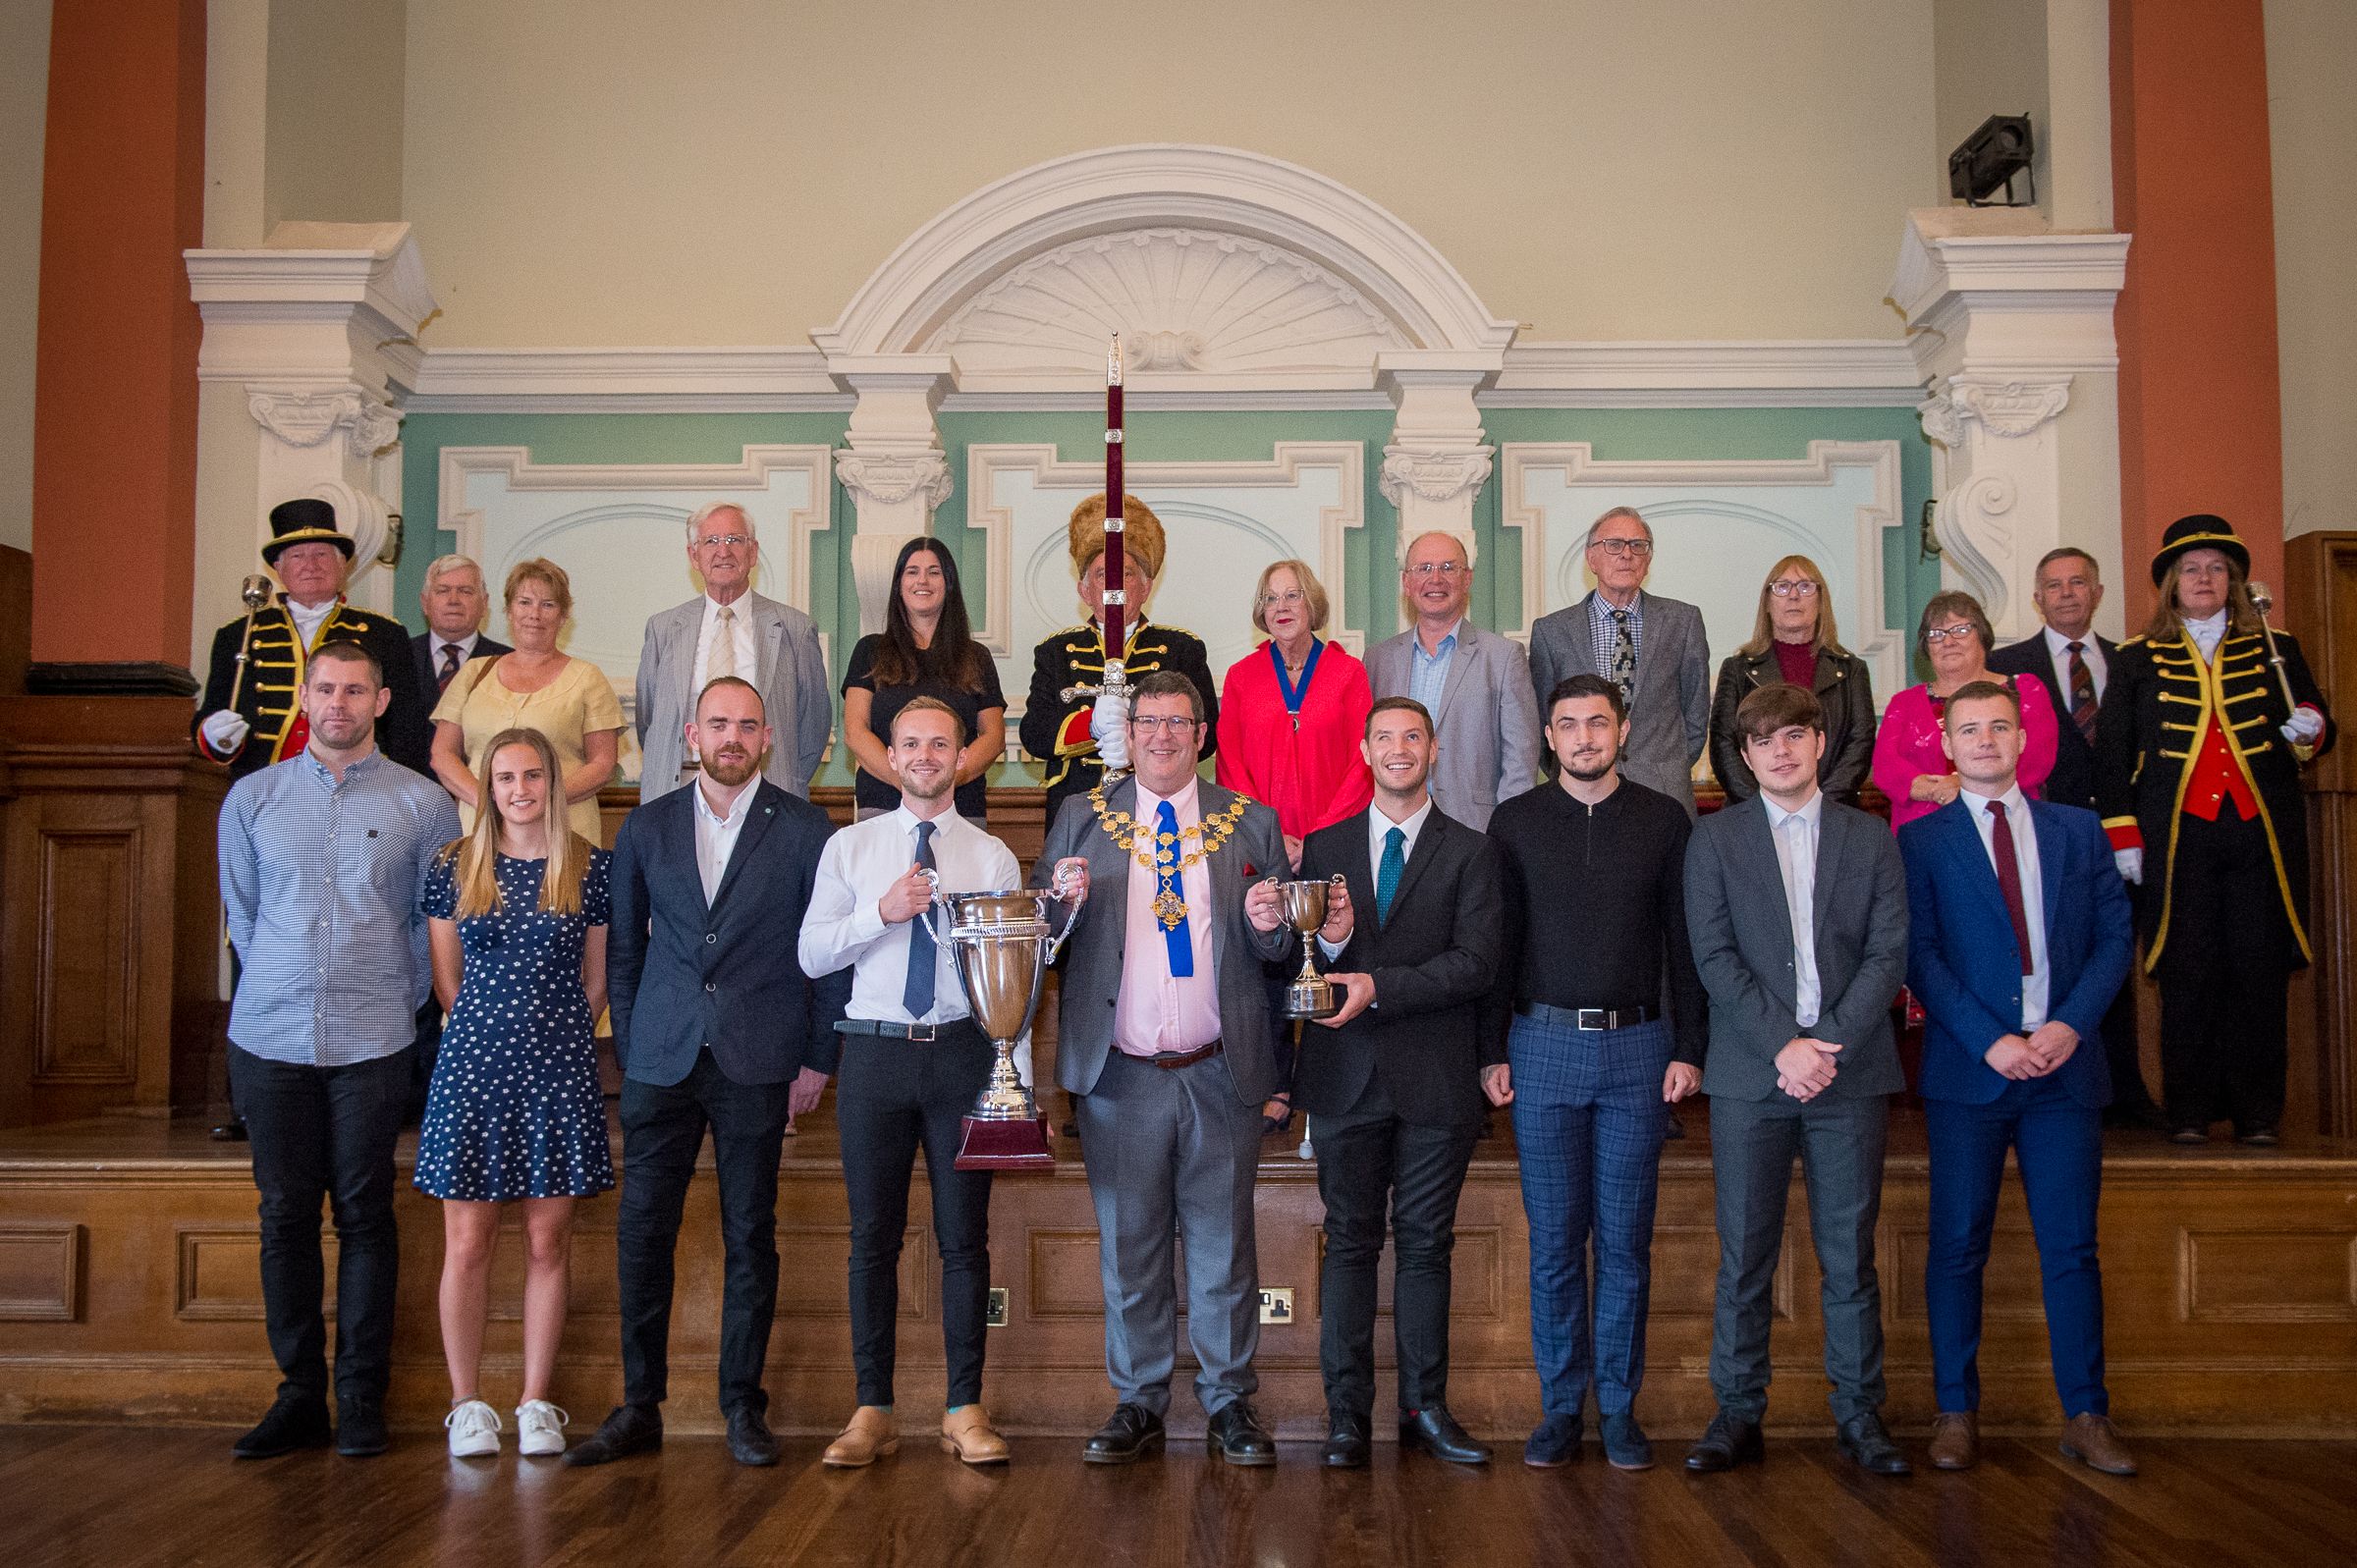 NEWS | Blind Football Team congratulated by Mayor of Hereford at Civic Reception